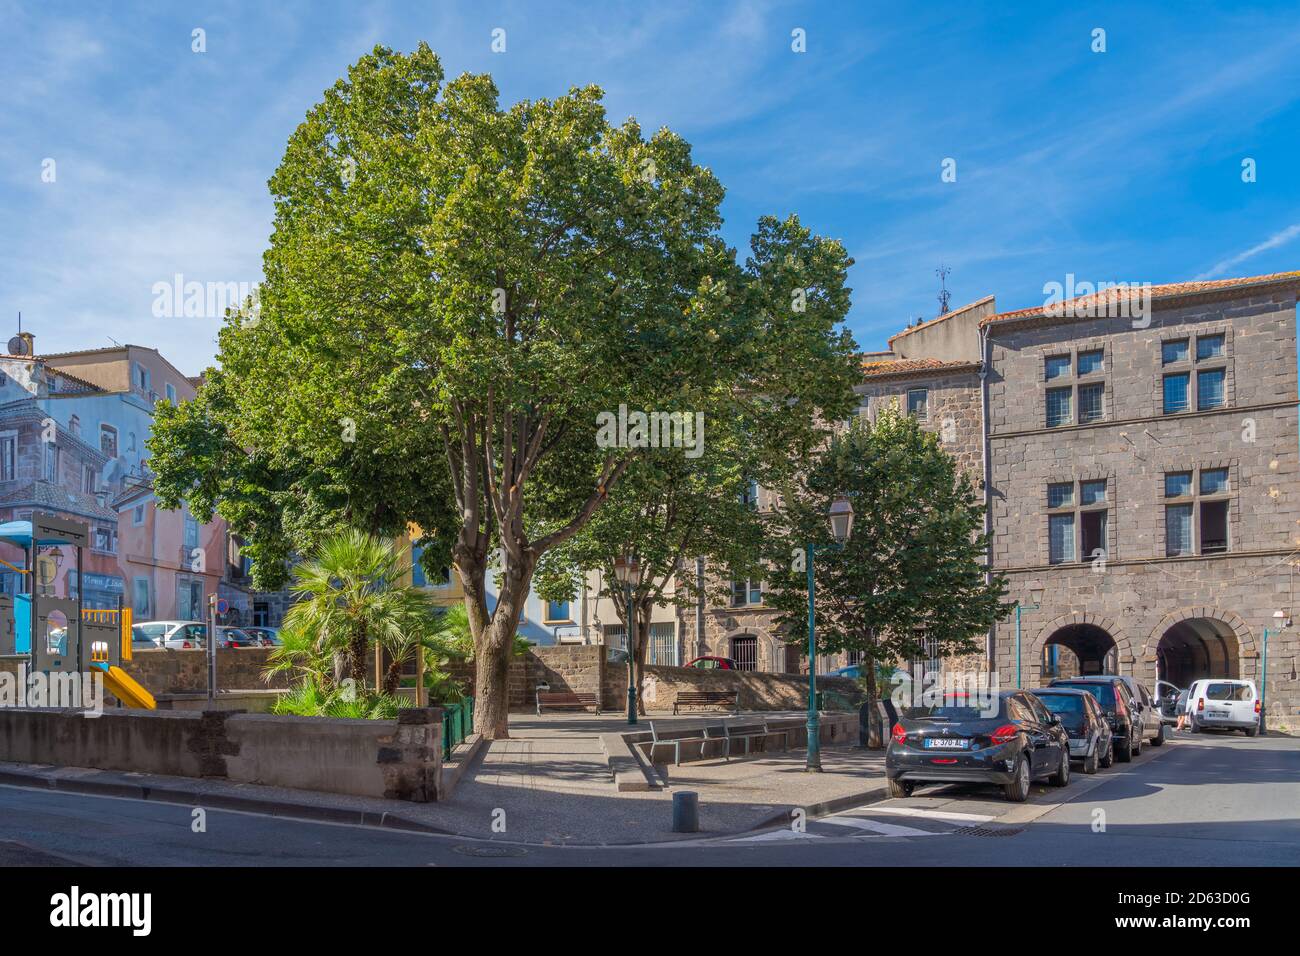 AGDE, FRANCE - July 19th, 2020 : Agde Centre with old Buildings, street view of the town Stock Photo